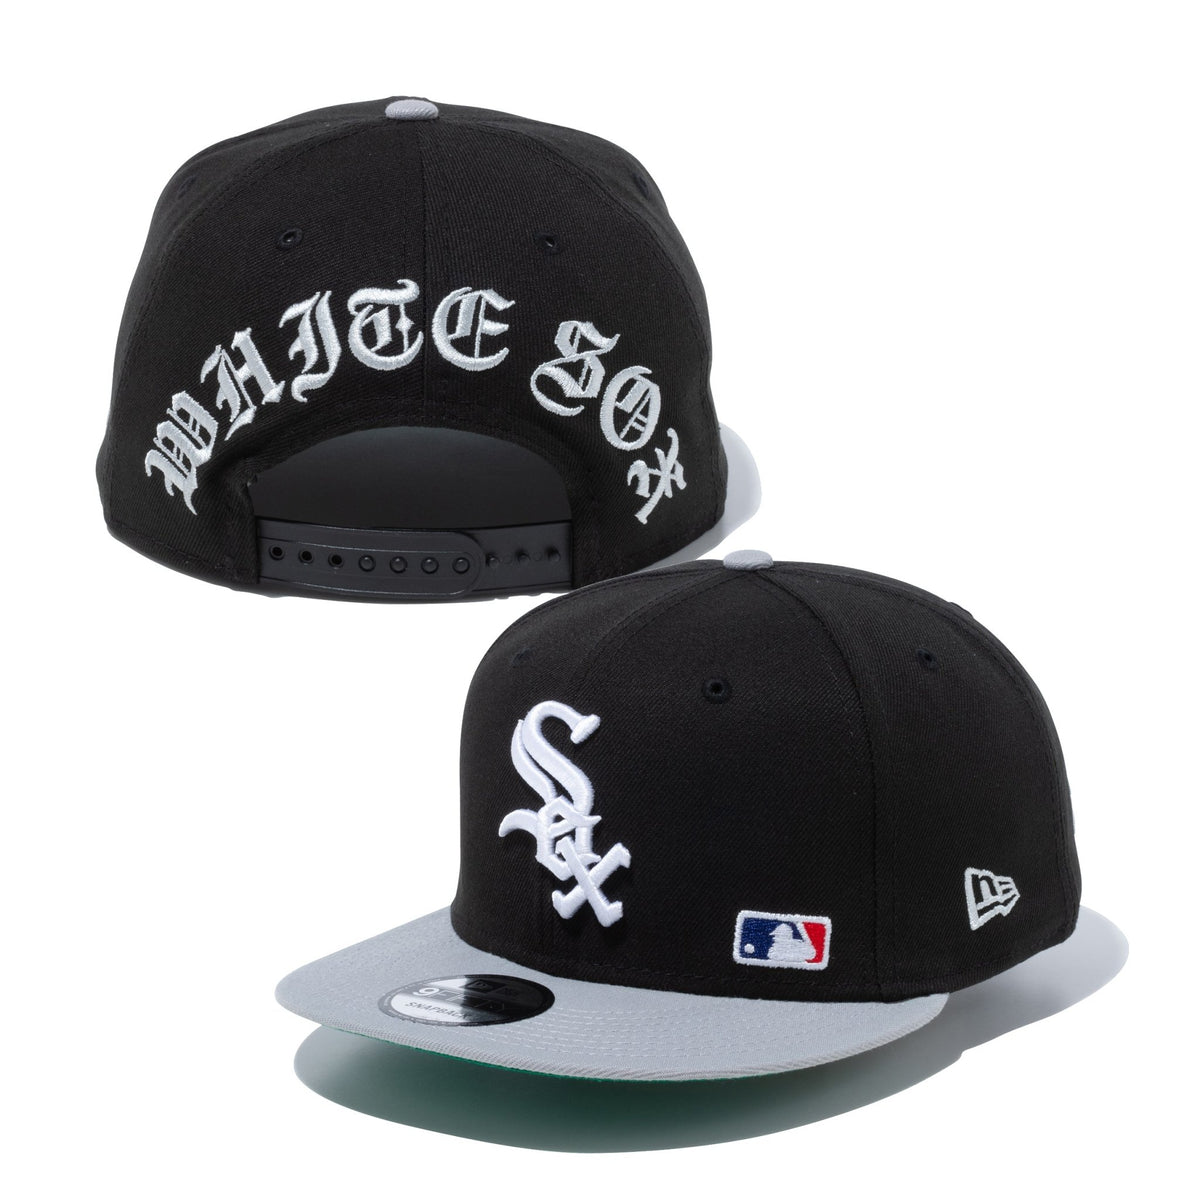 9FIFTY BLACK LETTER ARCH シカゴ・ホワイトソックス